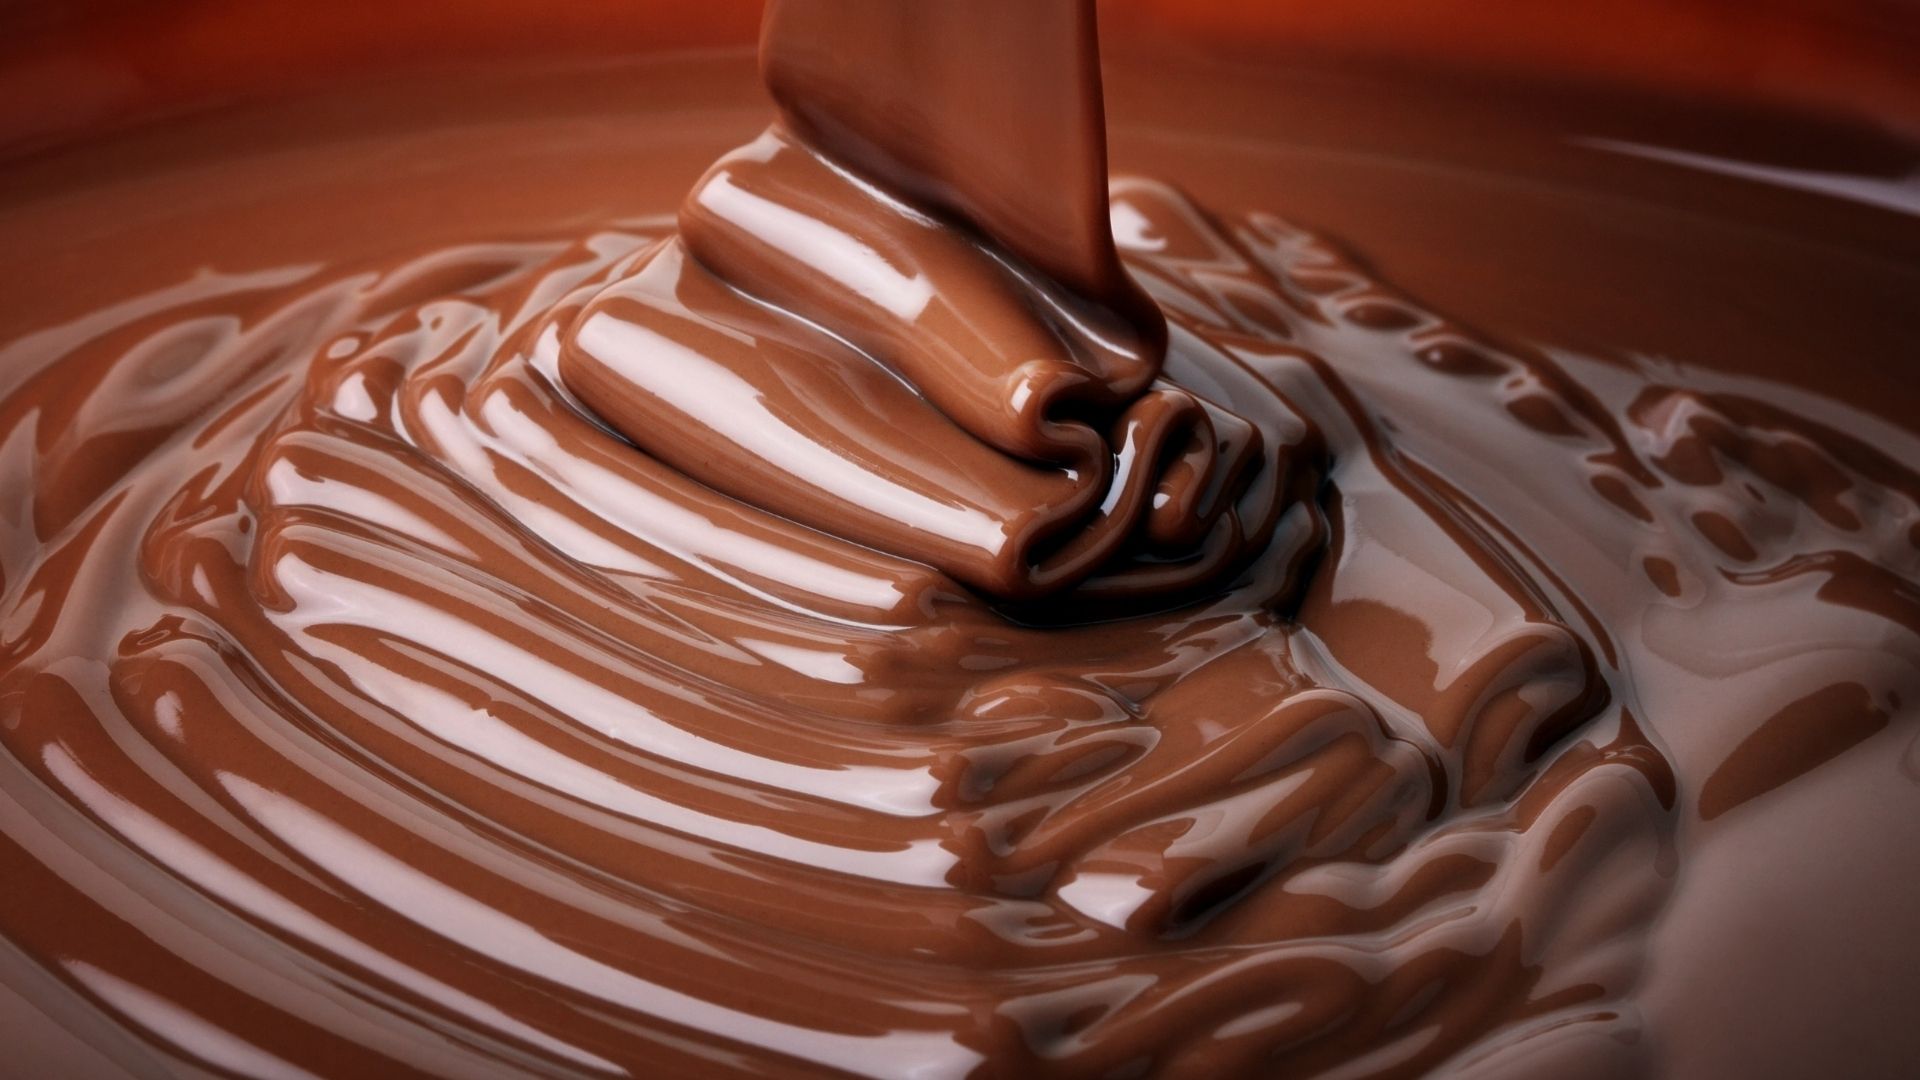 Episode 476 Do You Know - What Do You Know about Chocolate